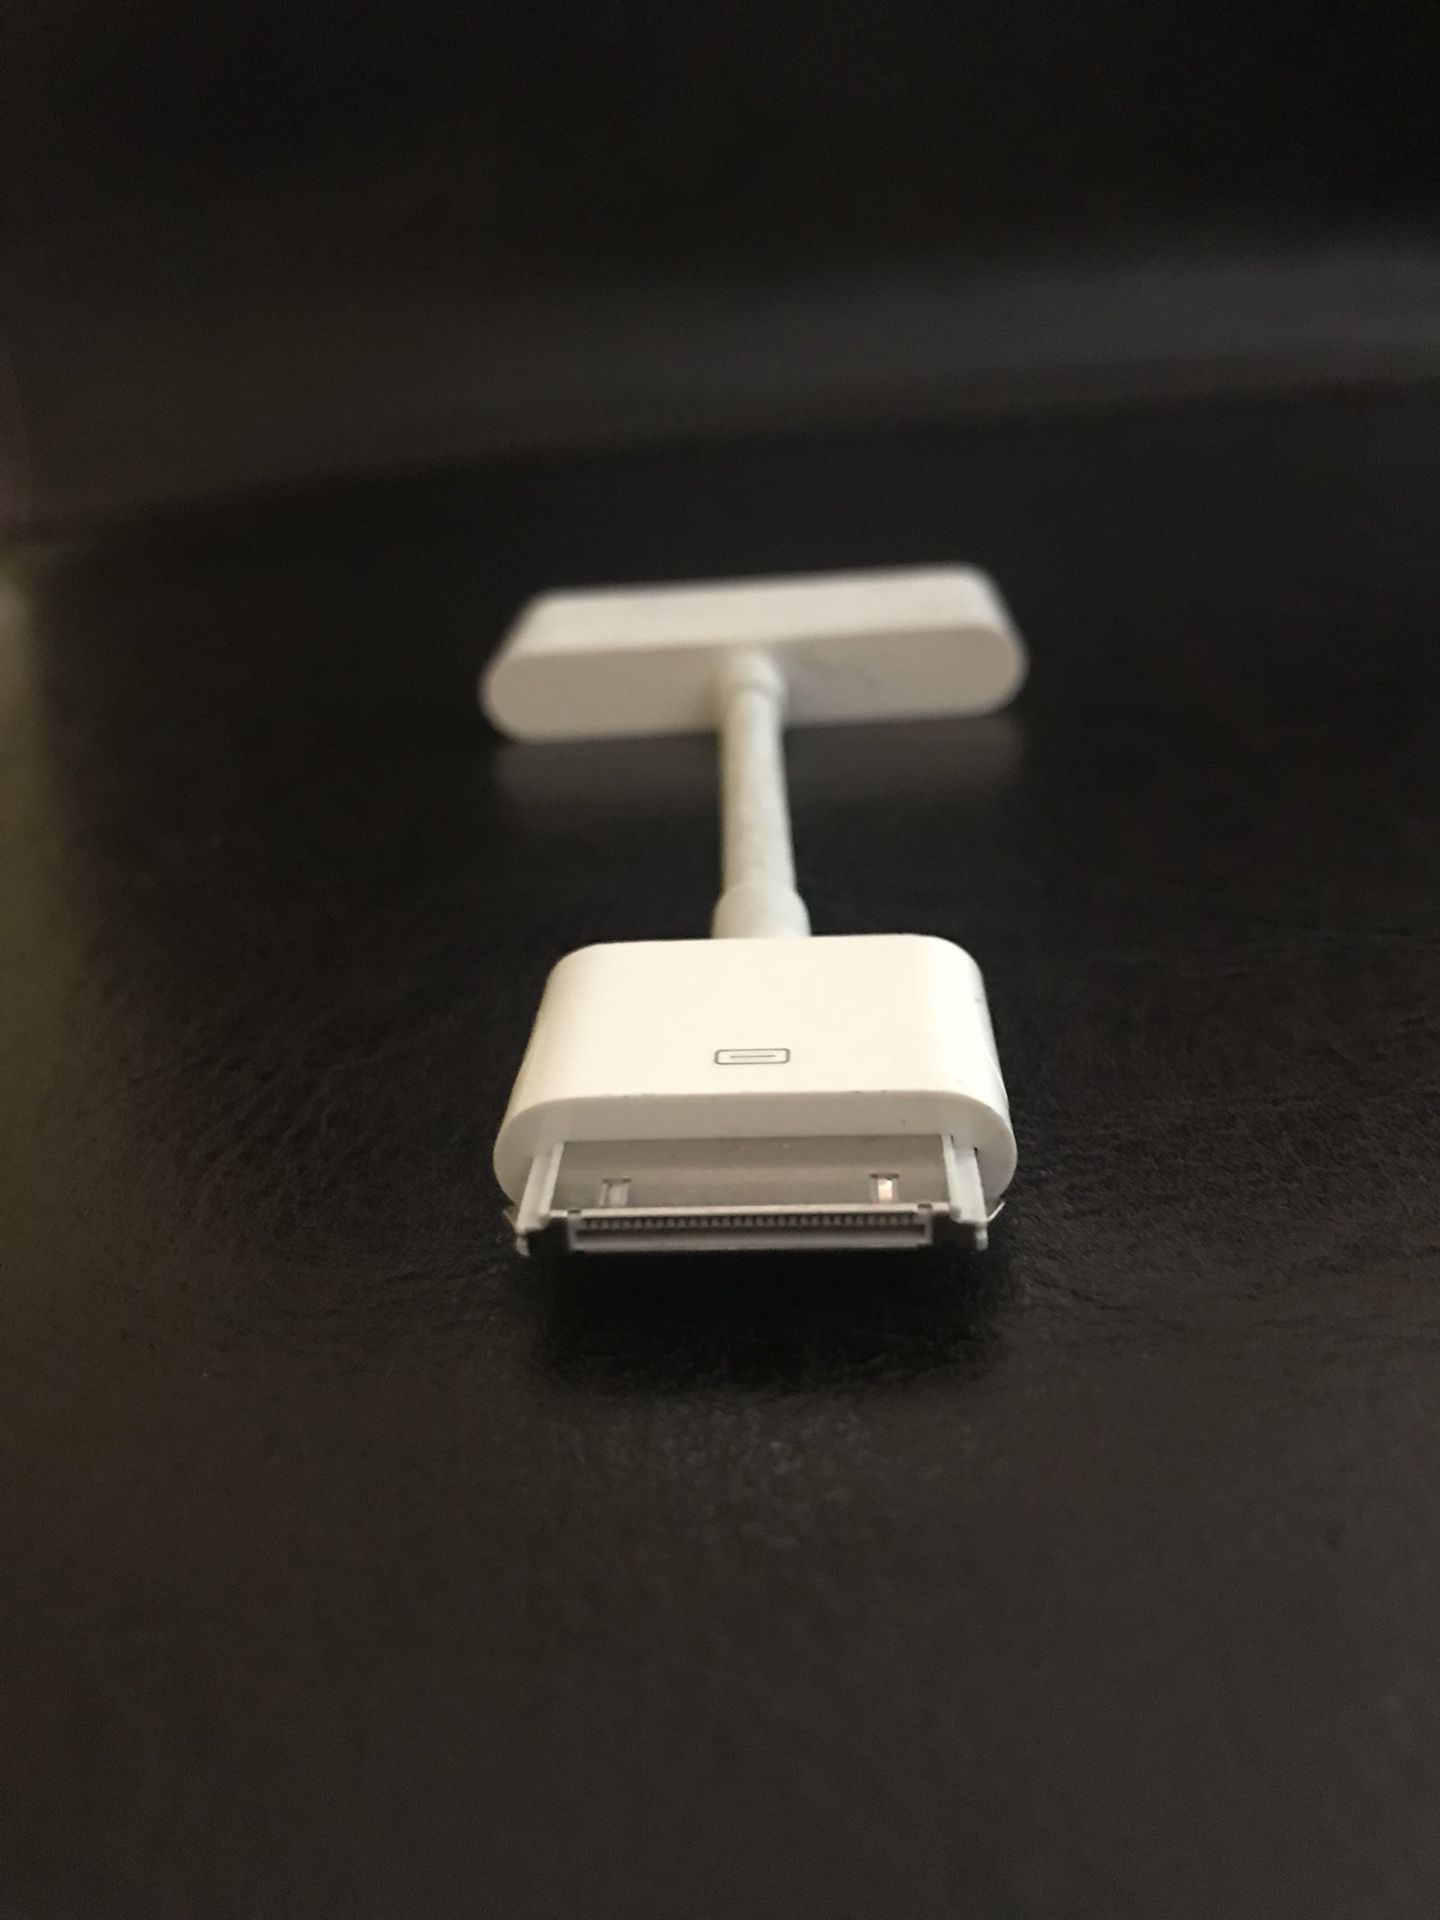 Apple Digital AV Adapter (30pin Dock Connector to HDMI With Charging Port)